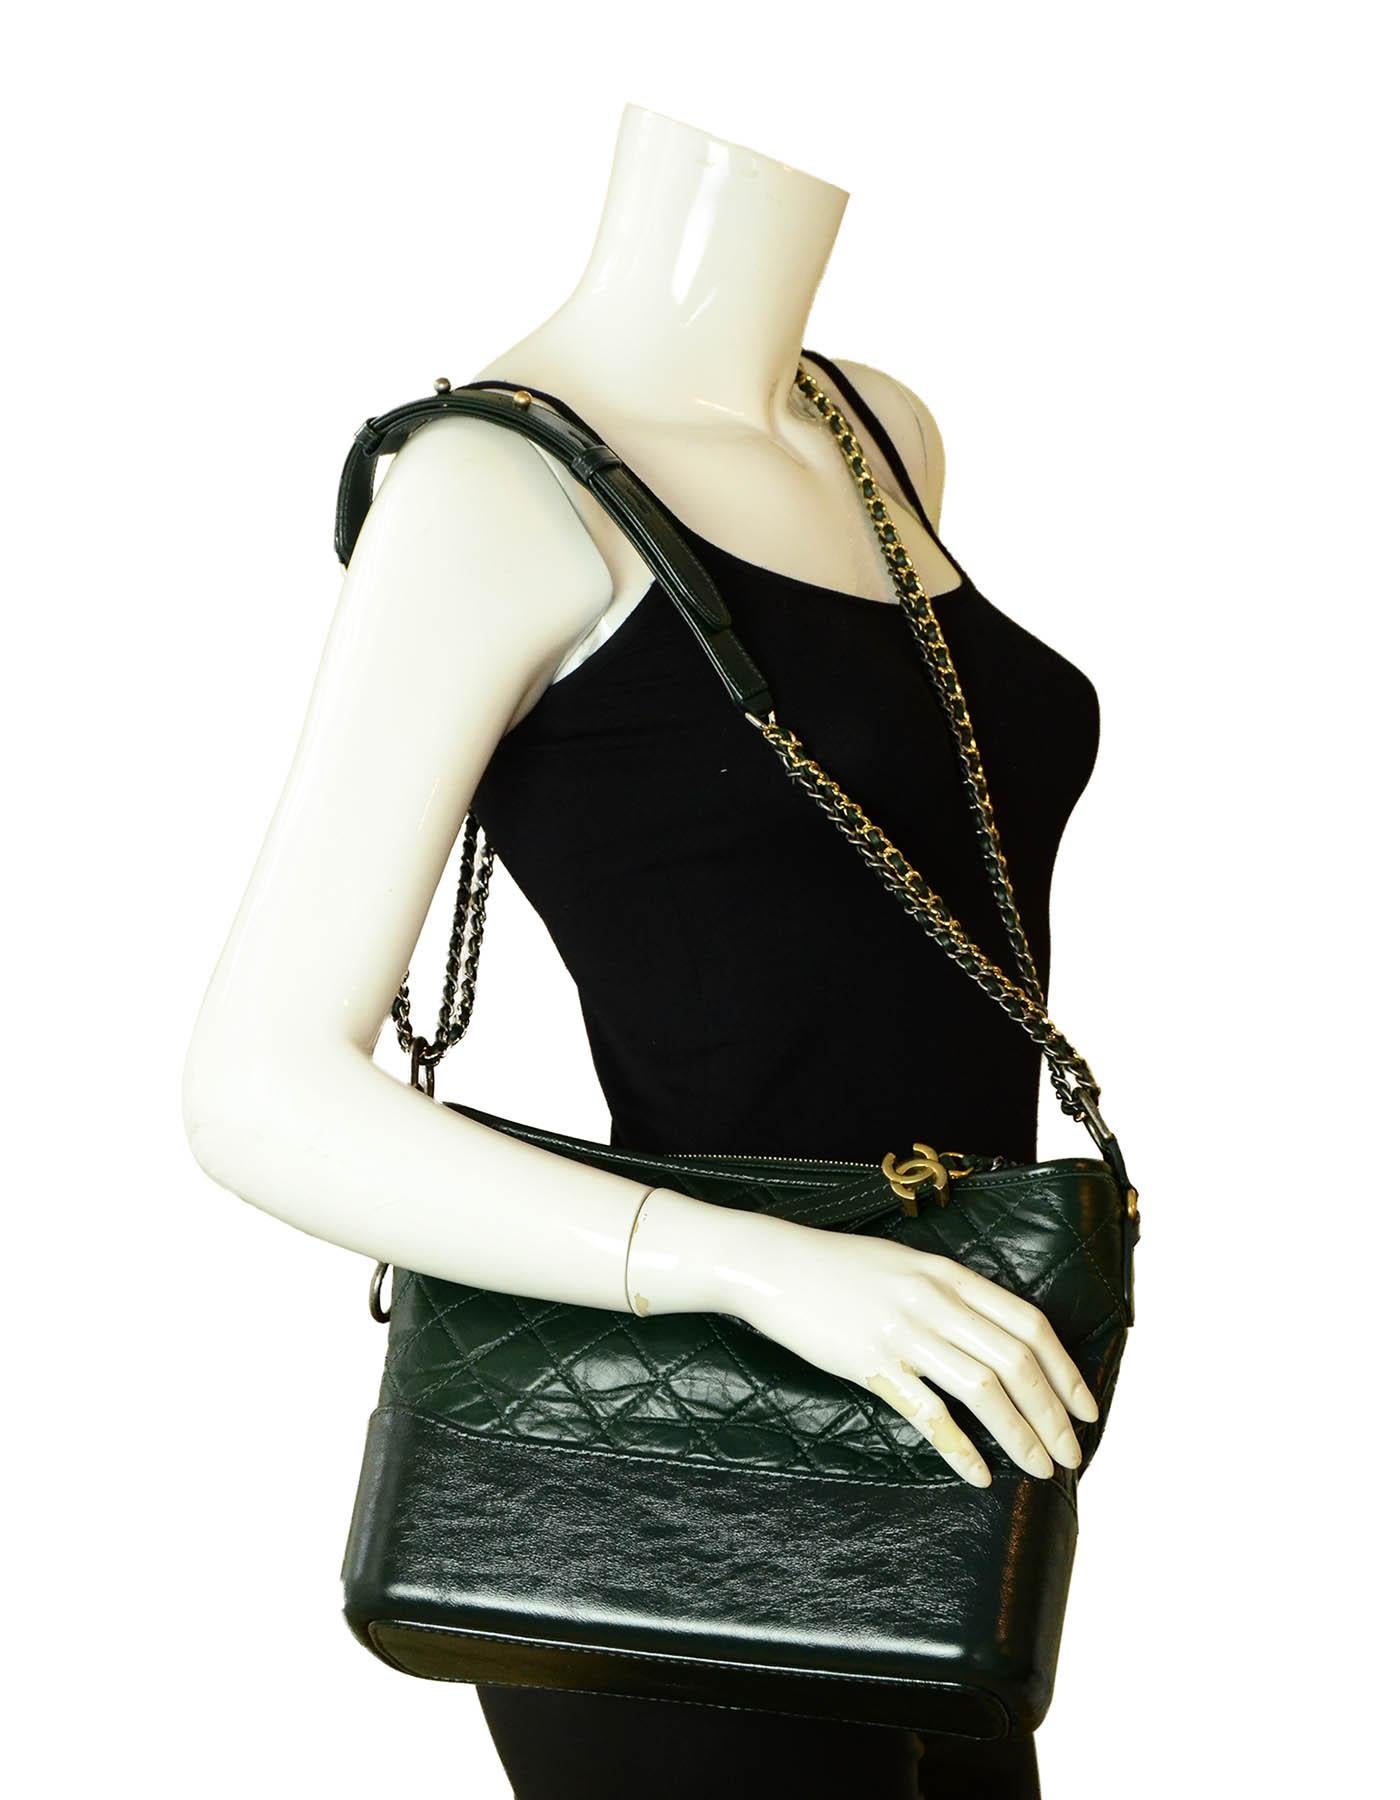 Chanel NWT 17A Distressed Dark Green Gabrielle Hobo Bag

Made In: Italy
Year of Production: 2017
Color: Dark Green
Hardware: Goldtone, silvertone & ruthenium chain
Materials: Aged calfskin leather
Lining: Red grosgrain
Closure/Opening: